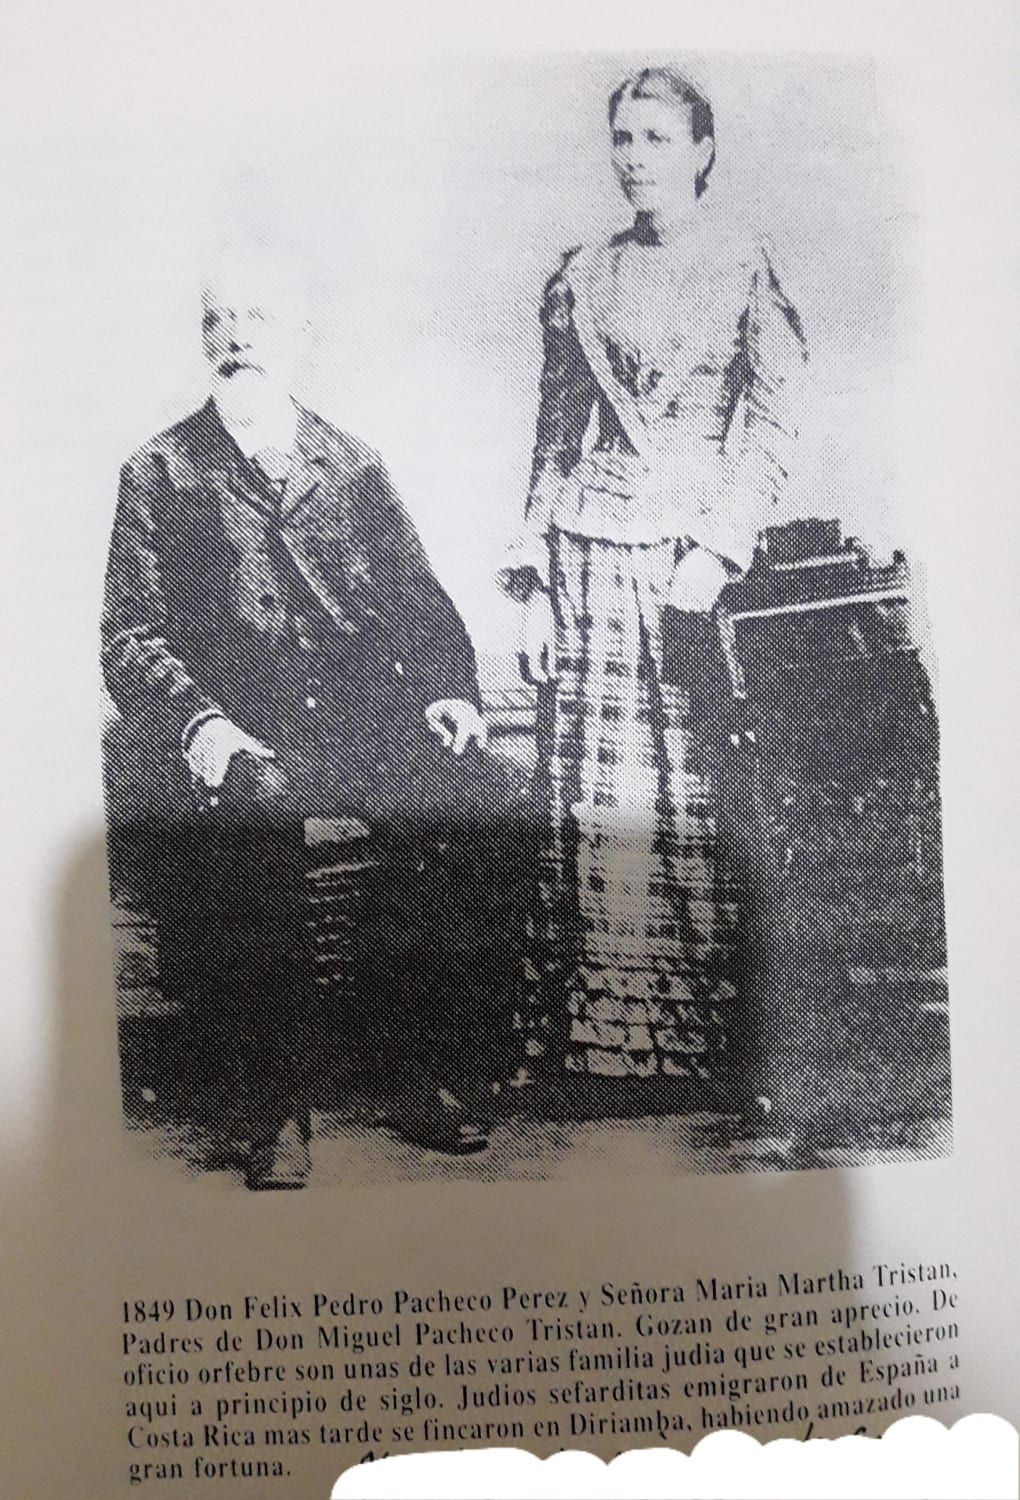 These are my Sephardic great grandparents. They left Spain and immigrated to Central America. Someone knows Jews from the Pacheco family (this is my surname)? My father was born in Nicaragua.